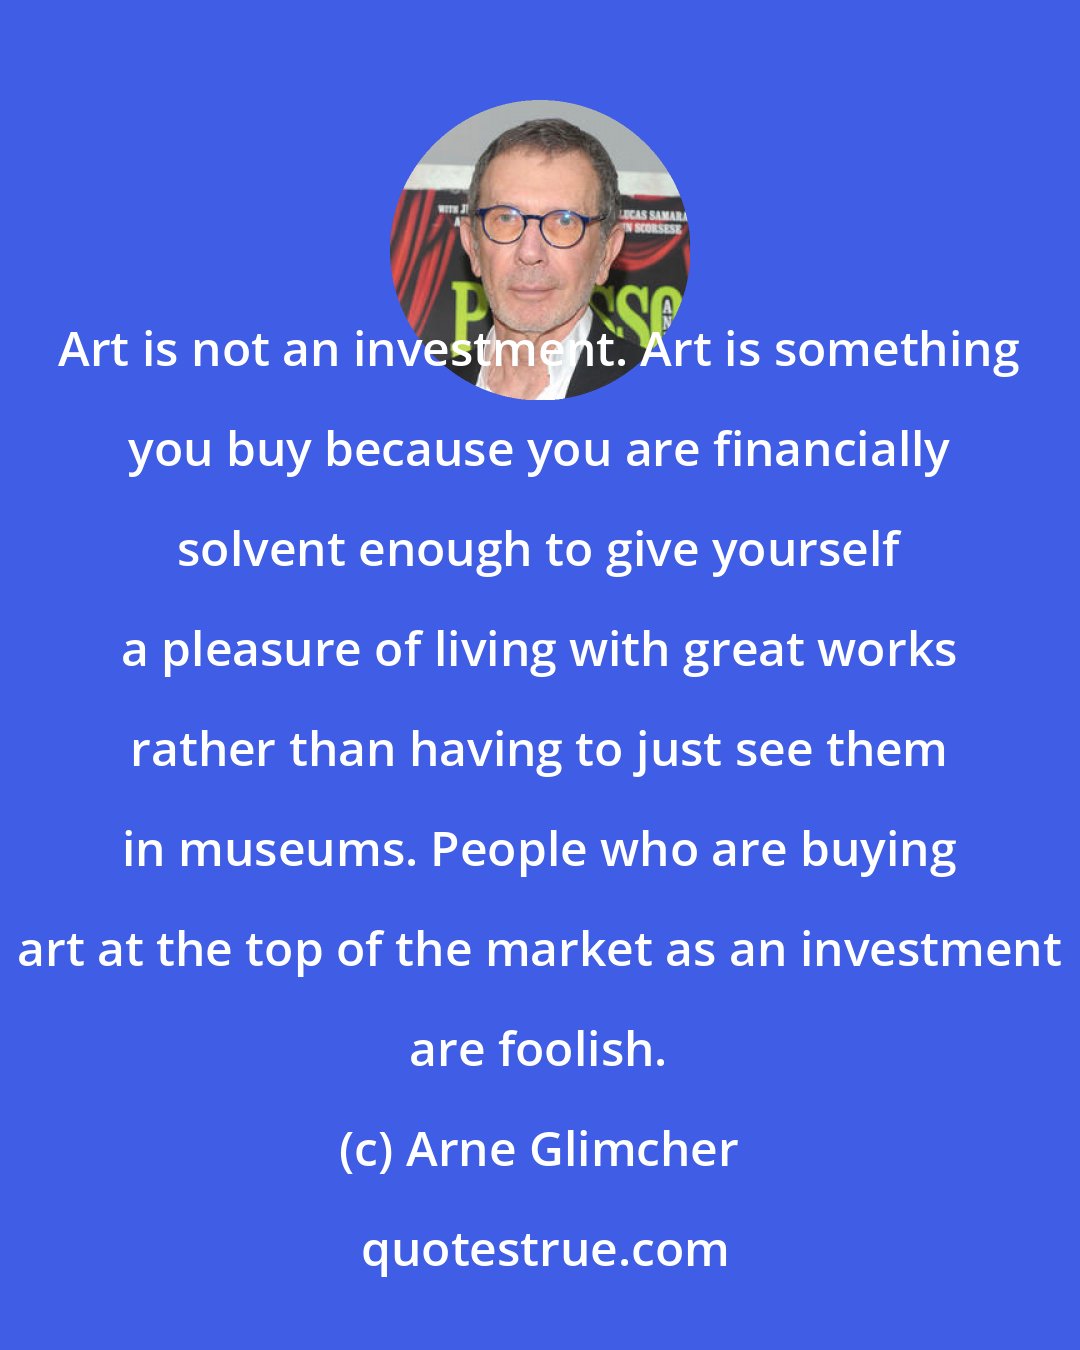 Arne Glimcher: Art is not an investment. Art is something you buy because you are financially solvent enough to give yourself a pleasure of living with great works rather than having to just see them in museums. People who are buying art at the top of the market as an investment are foolish.